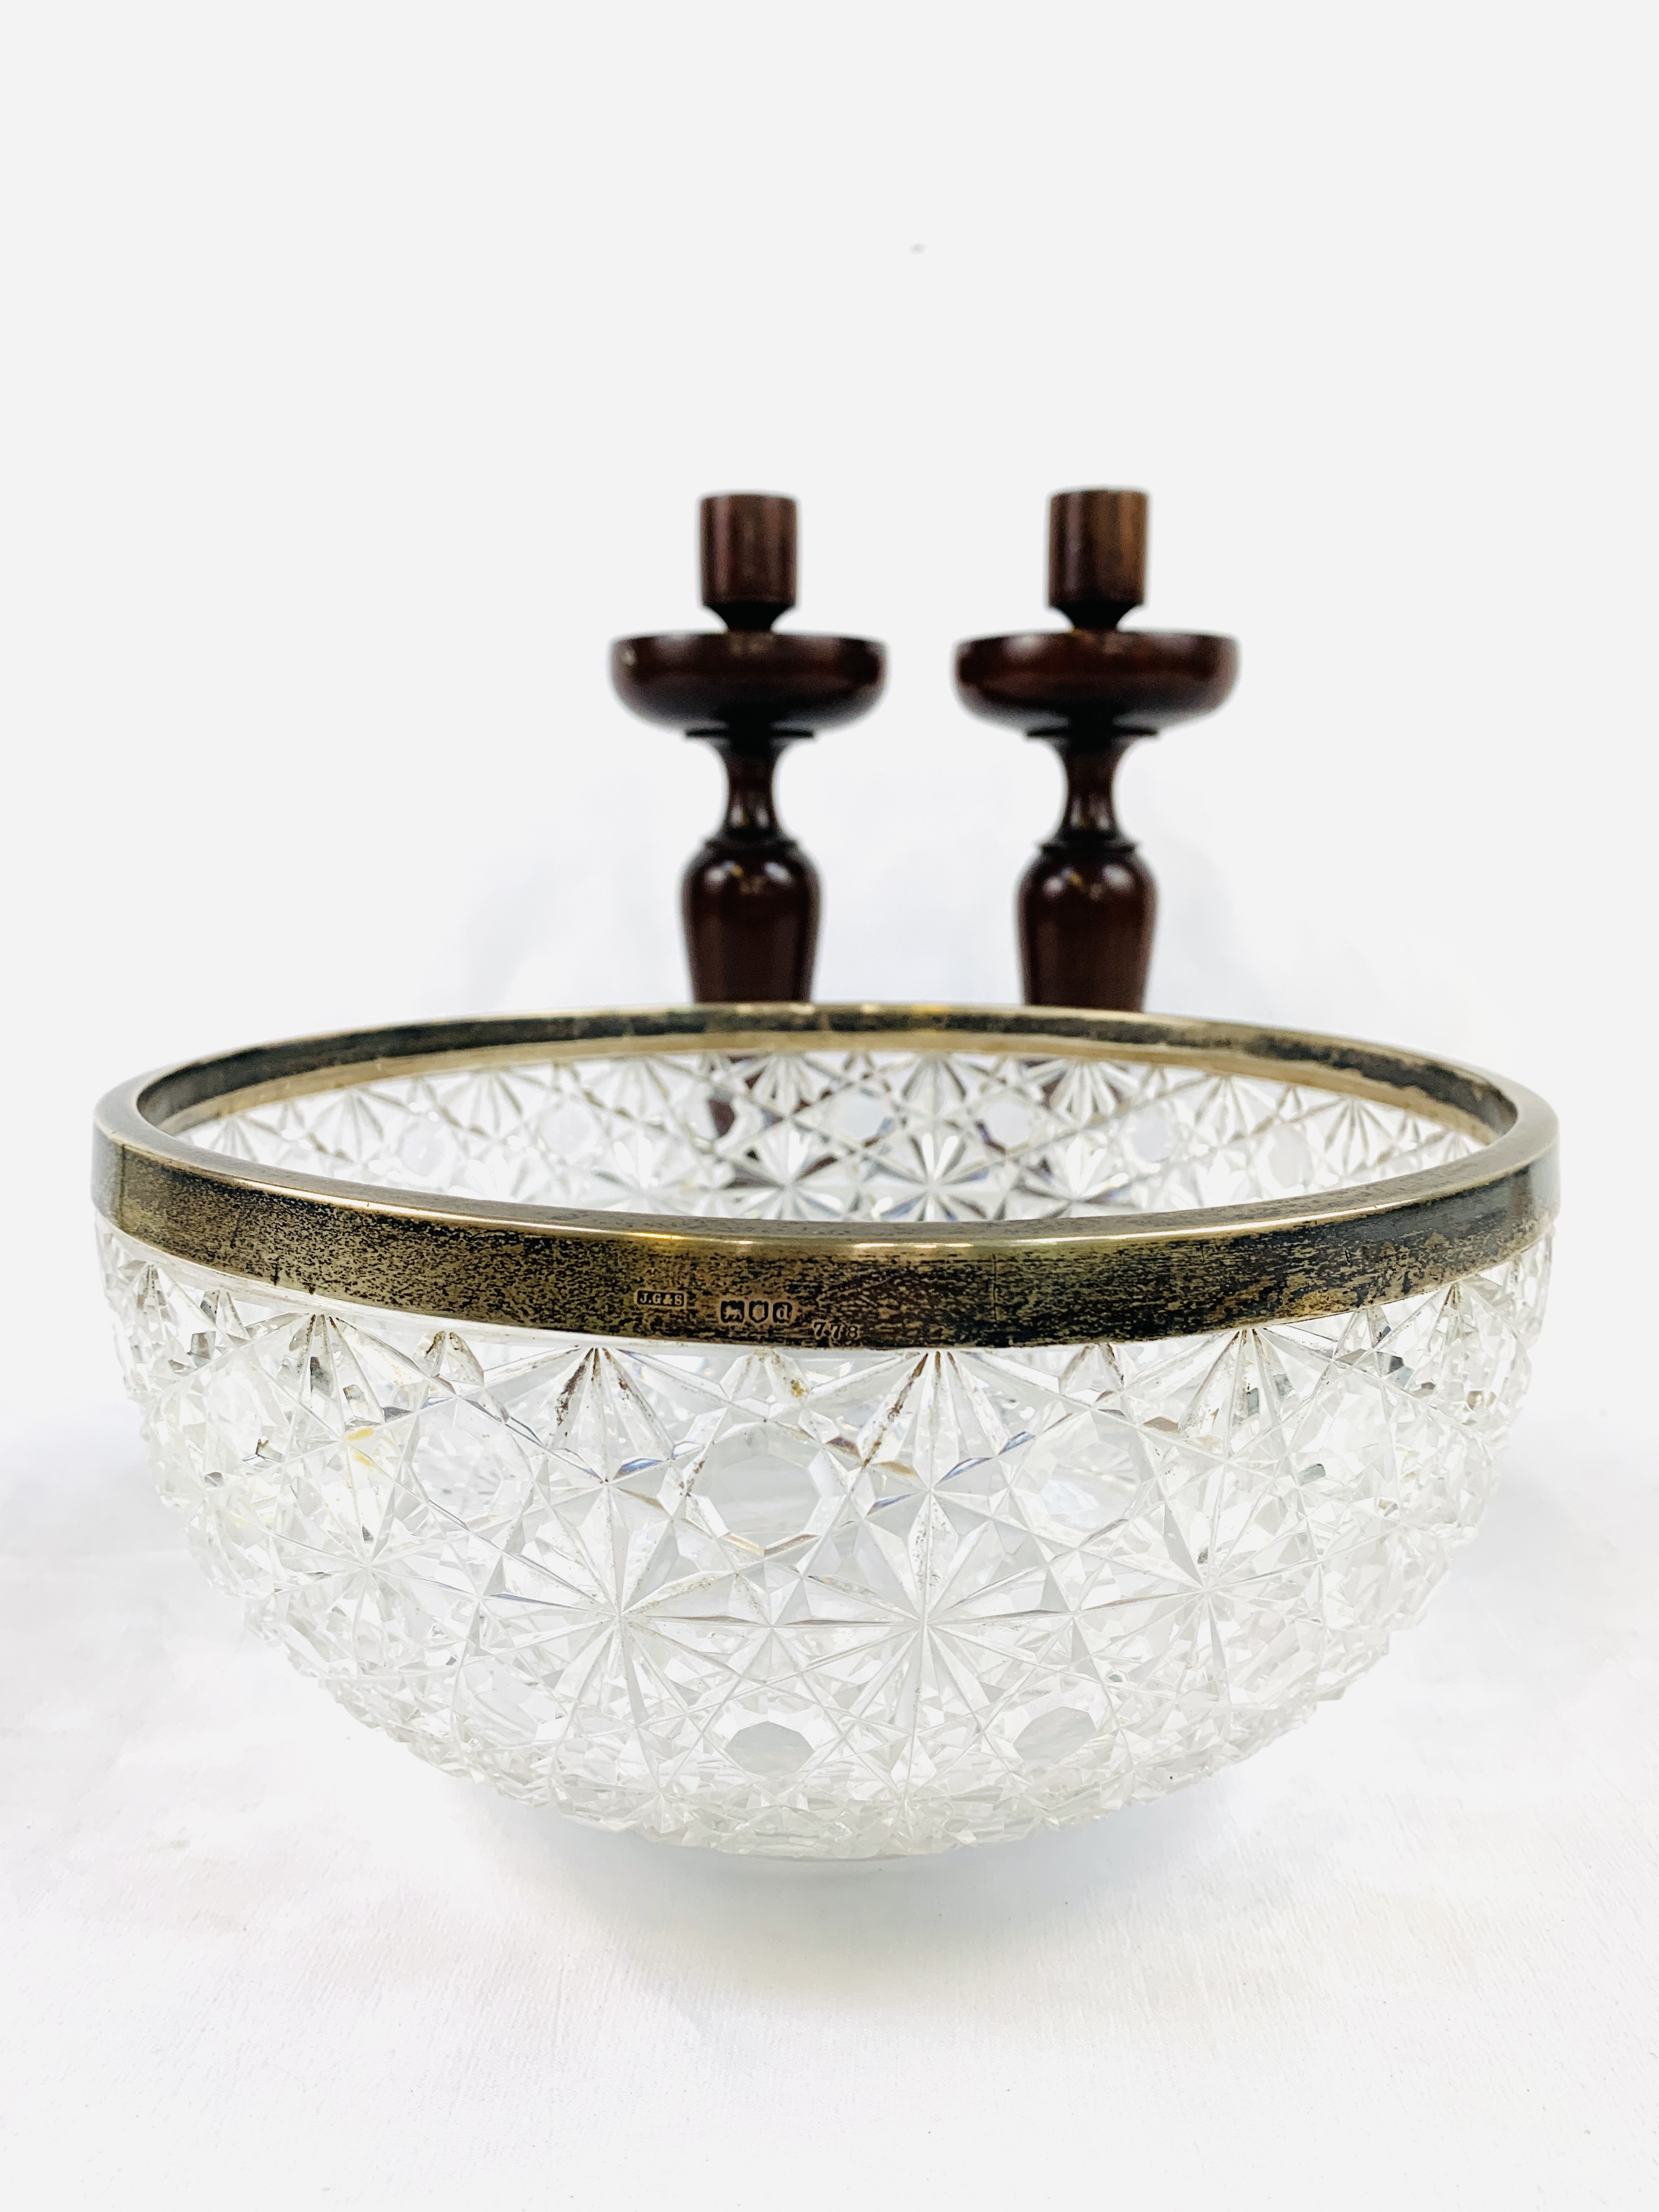 Cut glass fruit bowl with a silver rim and other items - Image 3 of 4